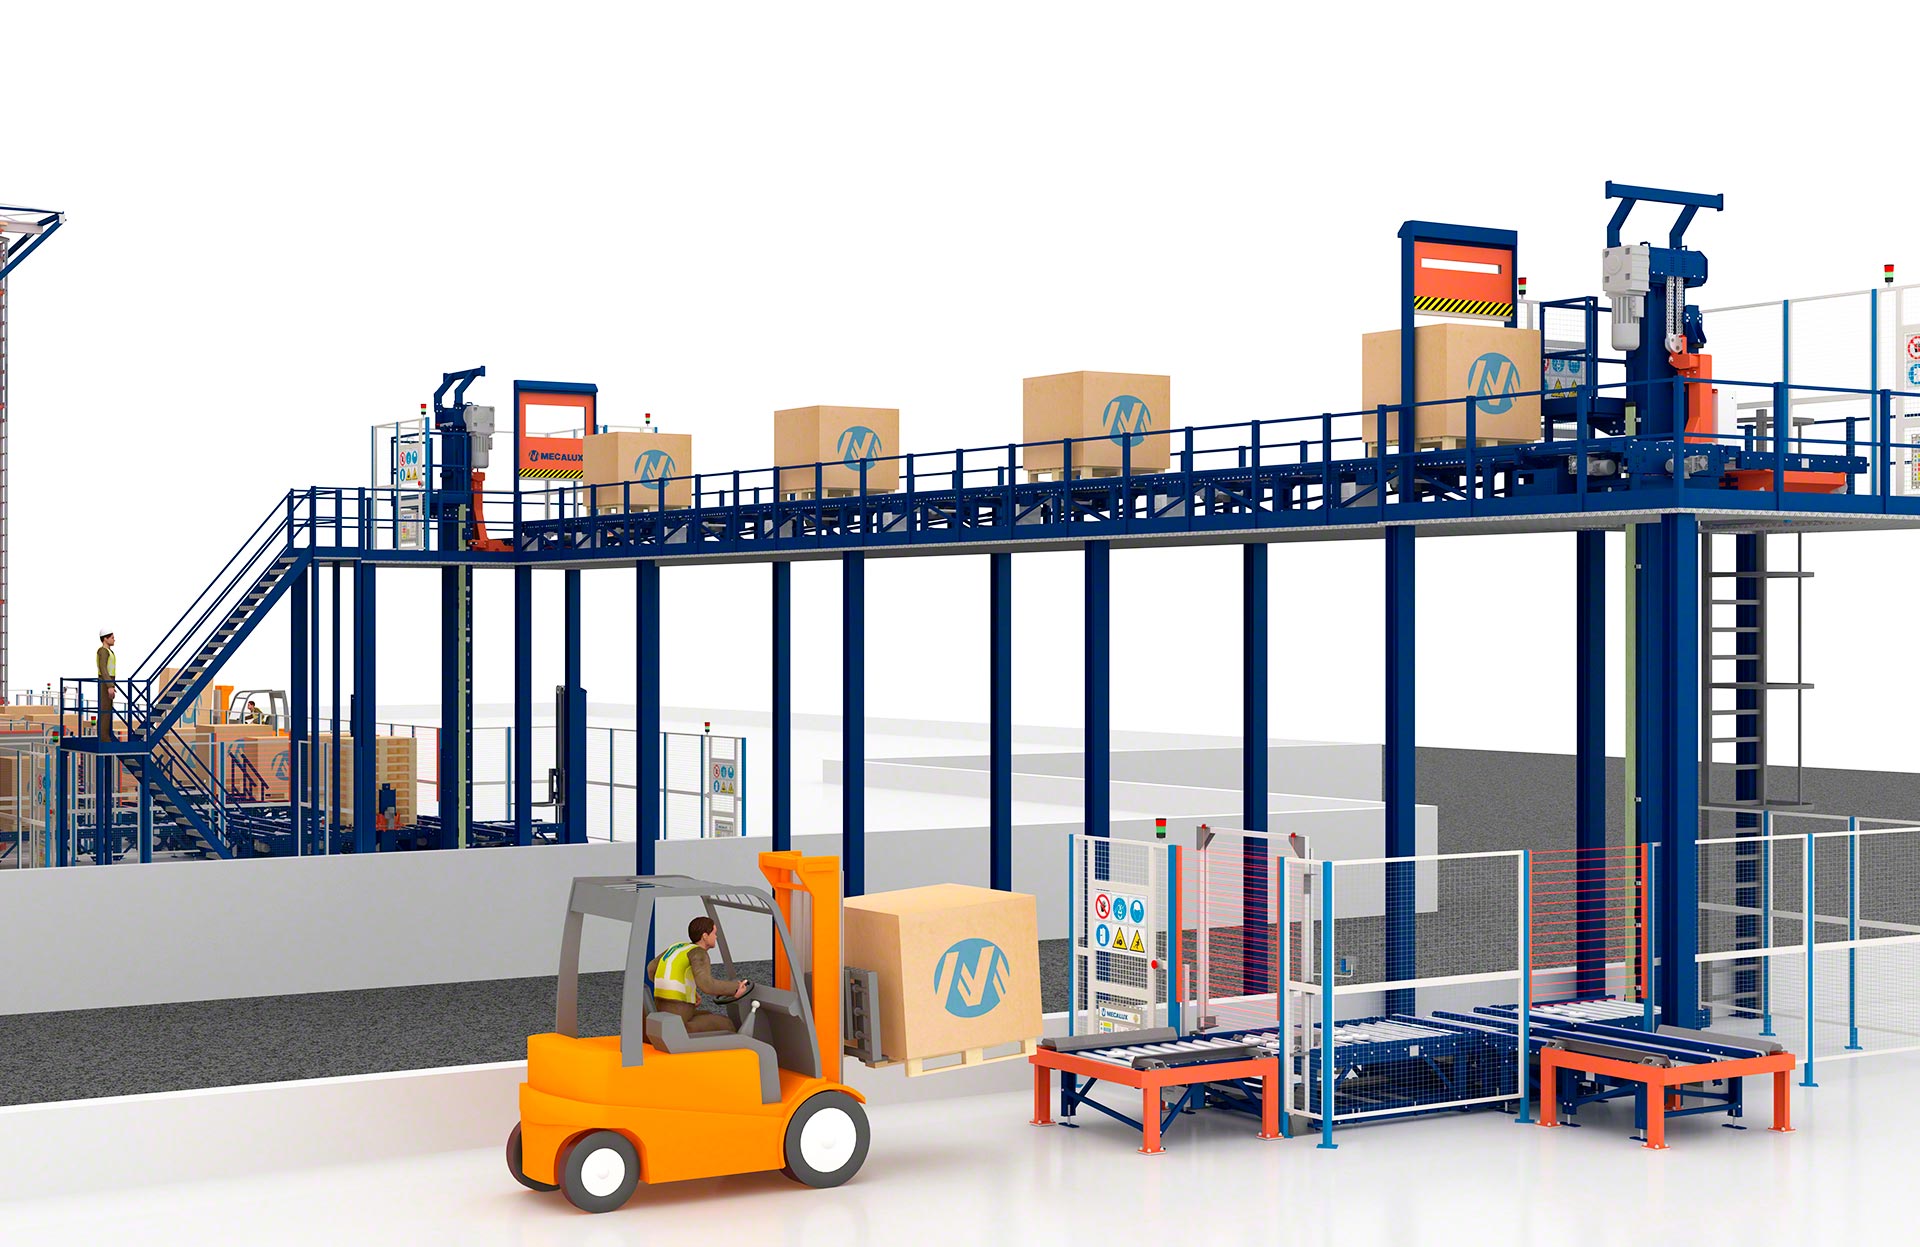 Pallet elevator systems facilitate the continuous transport of palletised loads at height